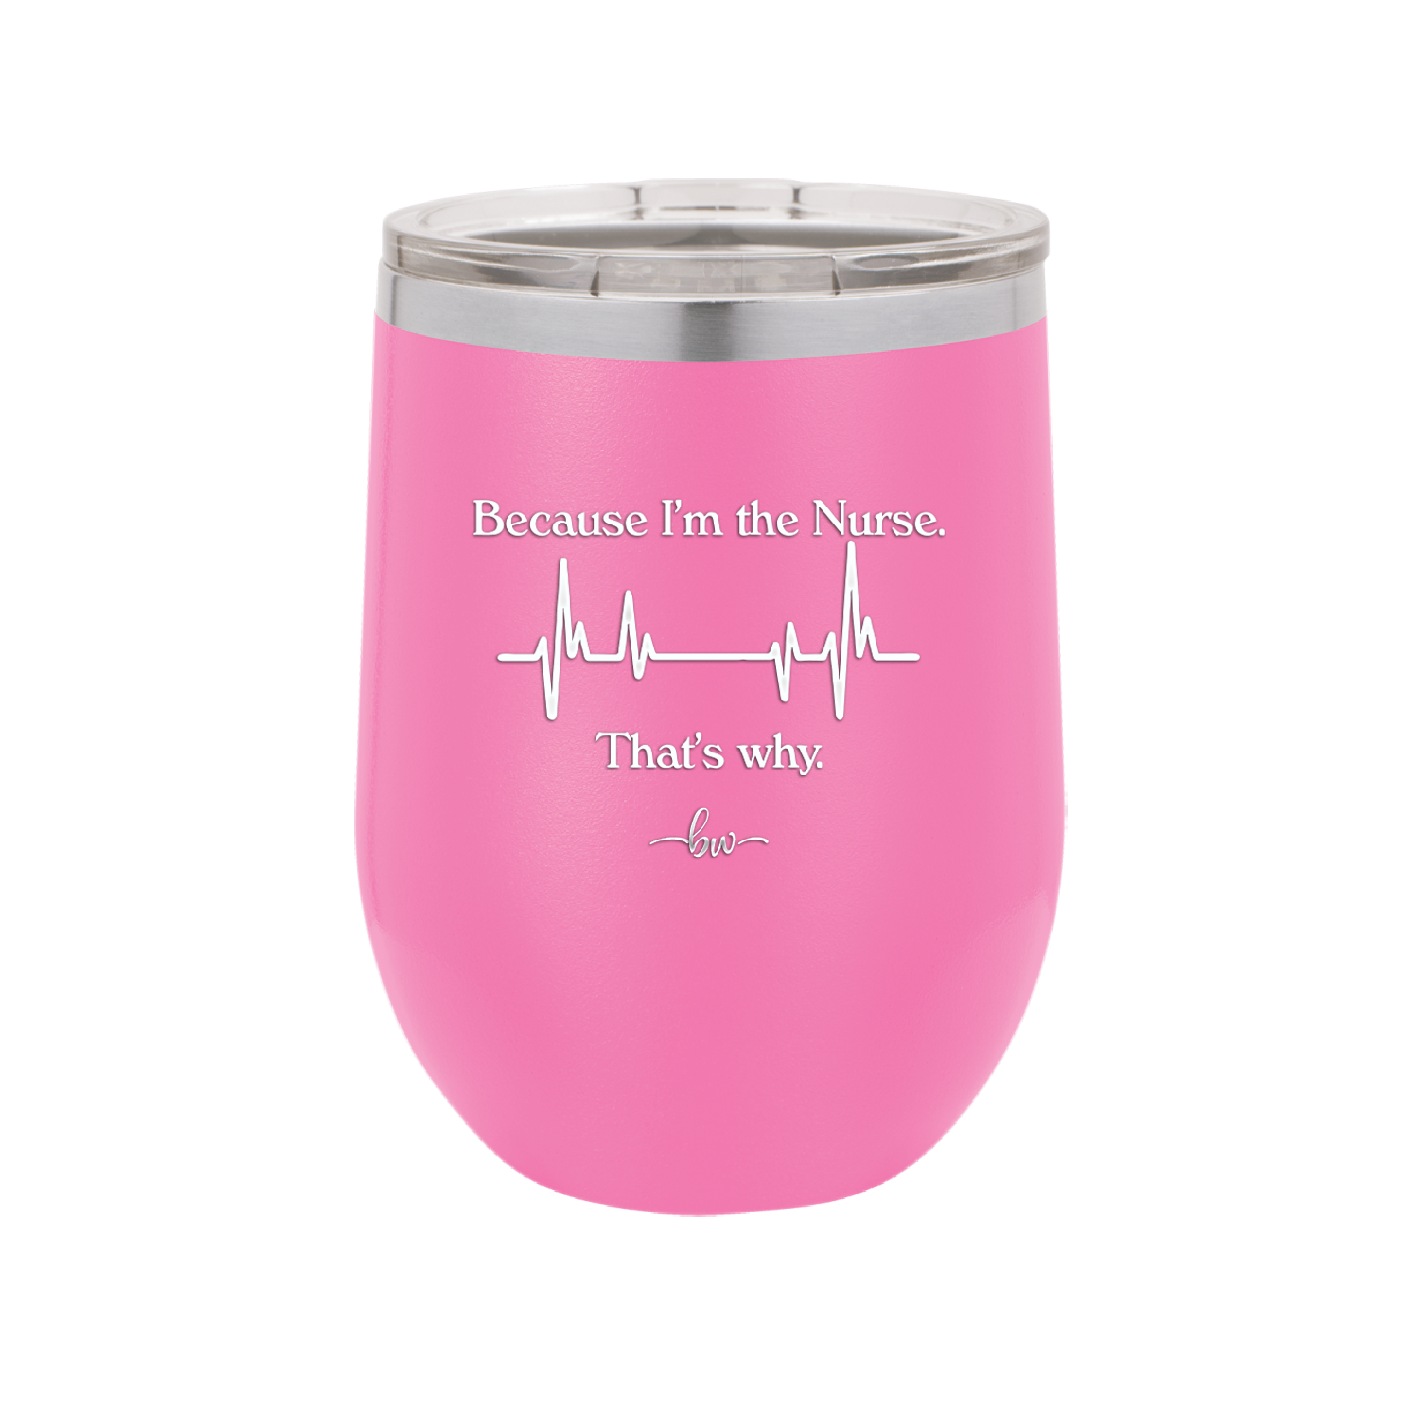 Because I'm a Nurse, That's Why - Laser Engraved Stainless Steel Drinkware - 1276 -